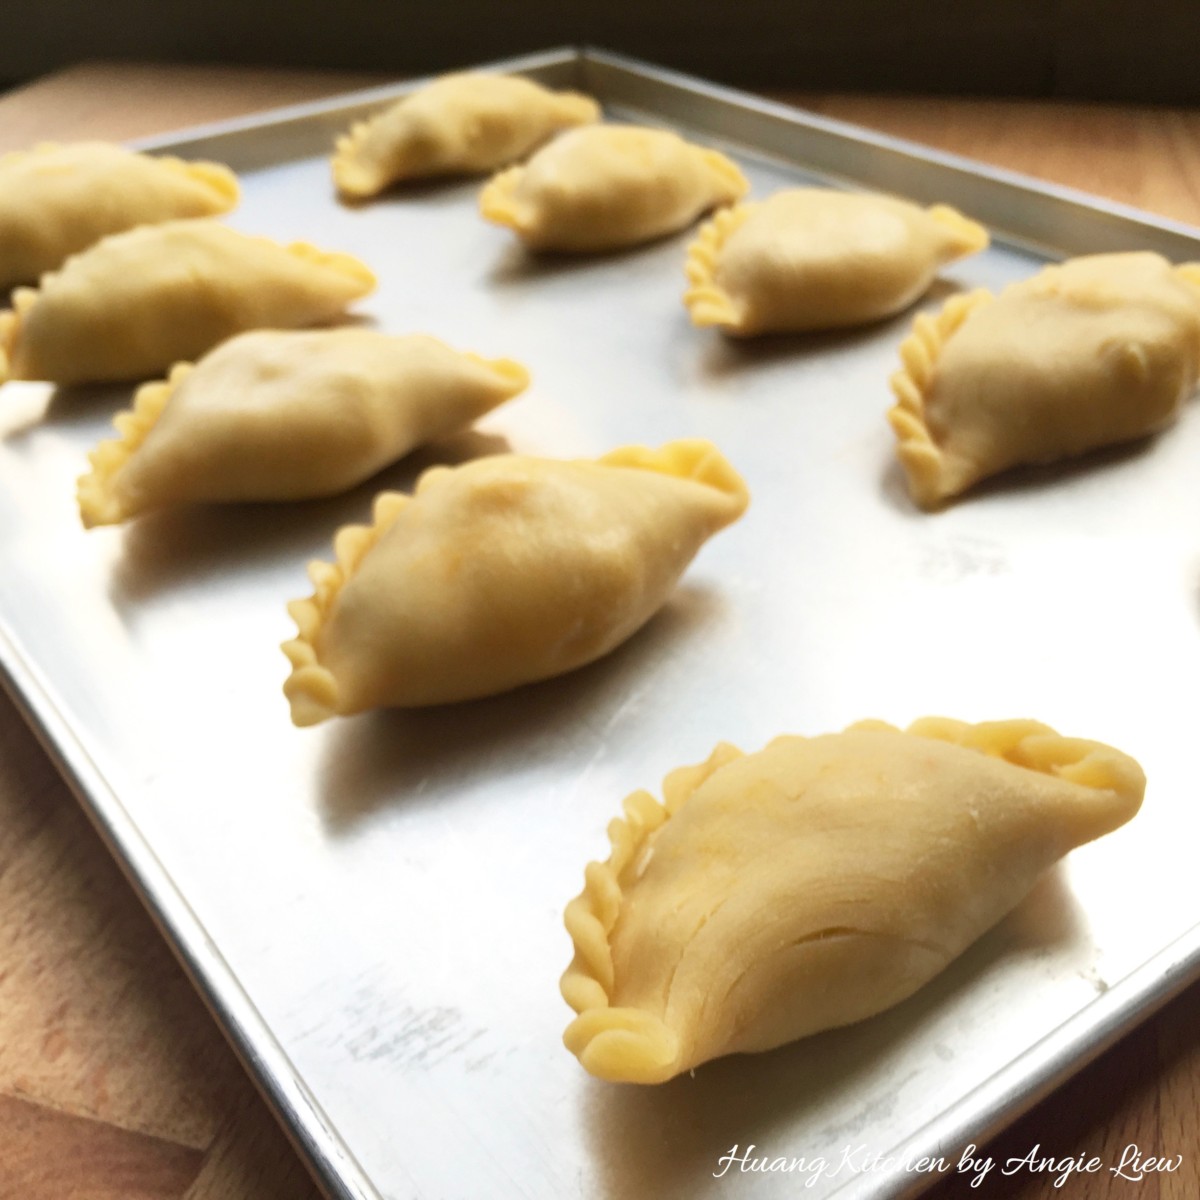 Spiral Curry Puffs recipe - repeat for rest